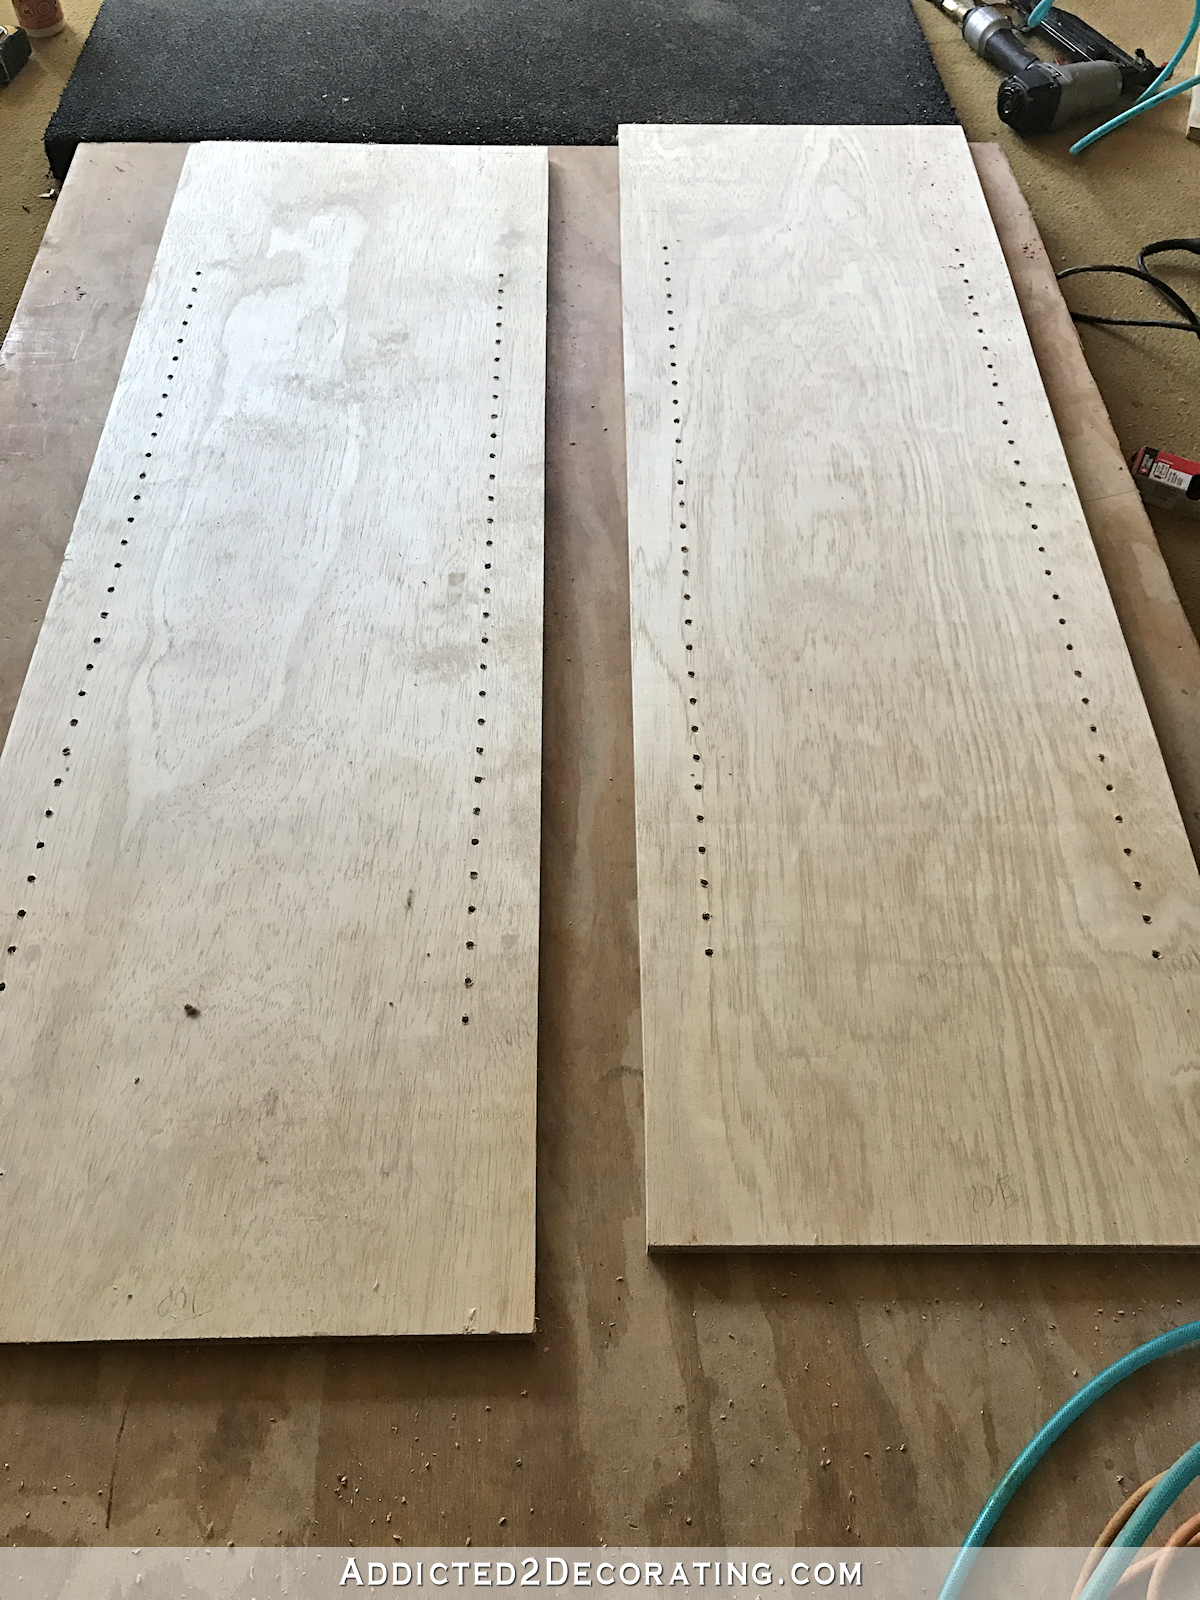 how to build cabinets- 14 - upper cabinet section - side pieces with shelf pin holes drilled